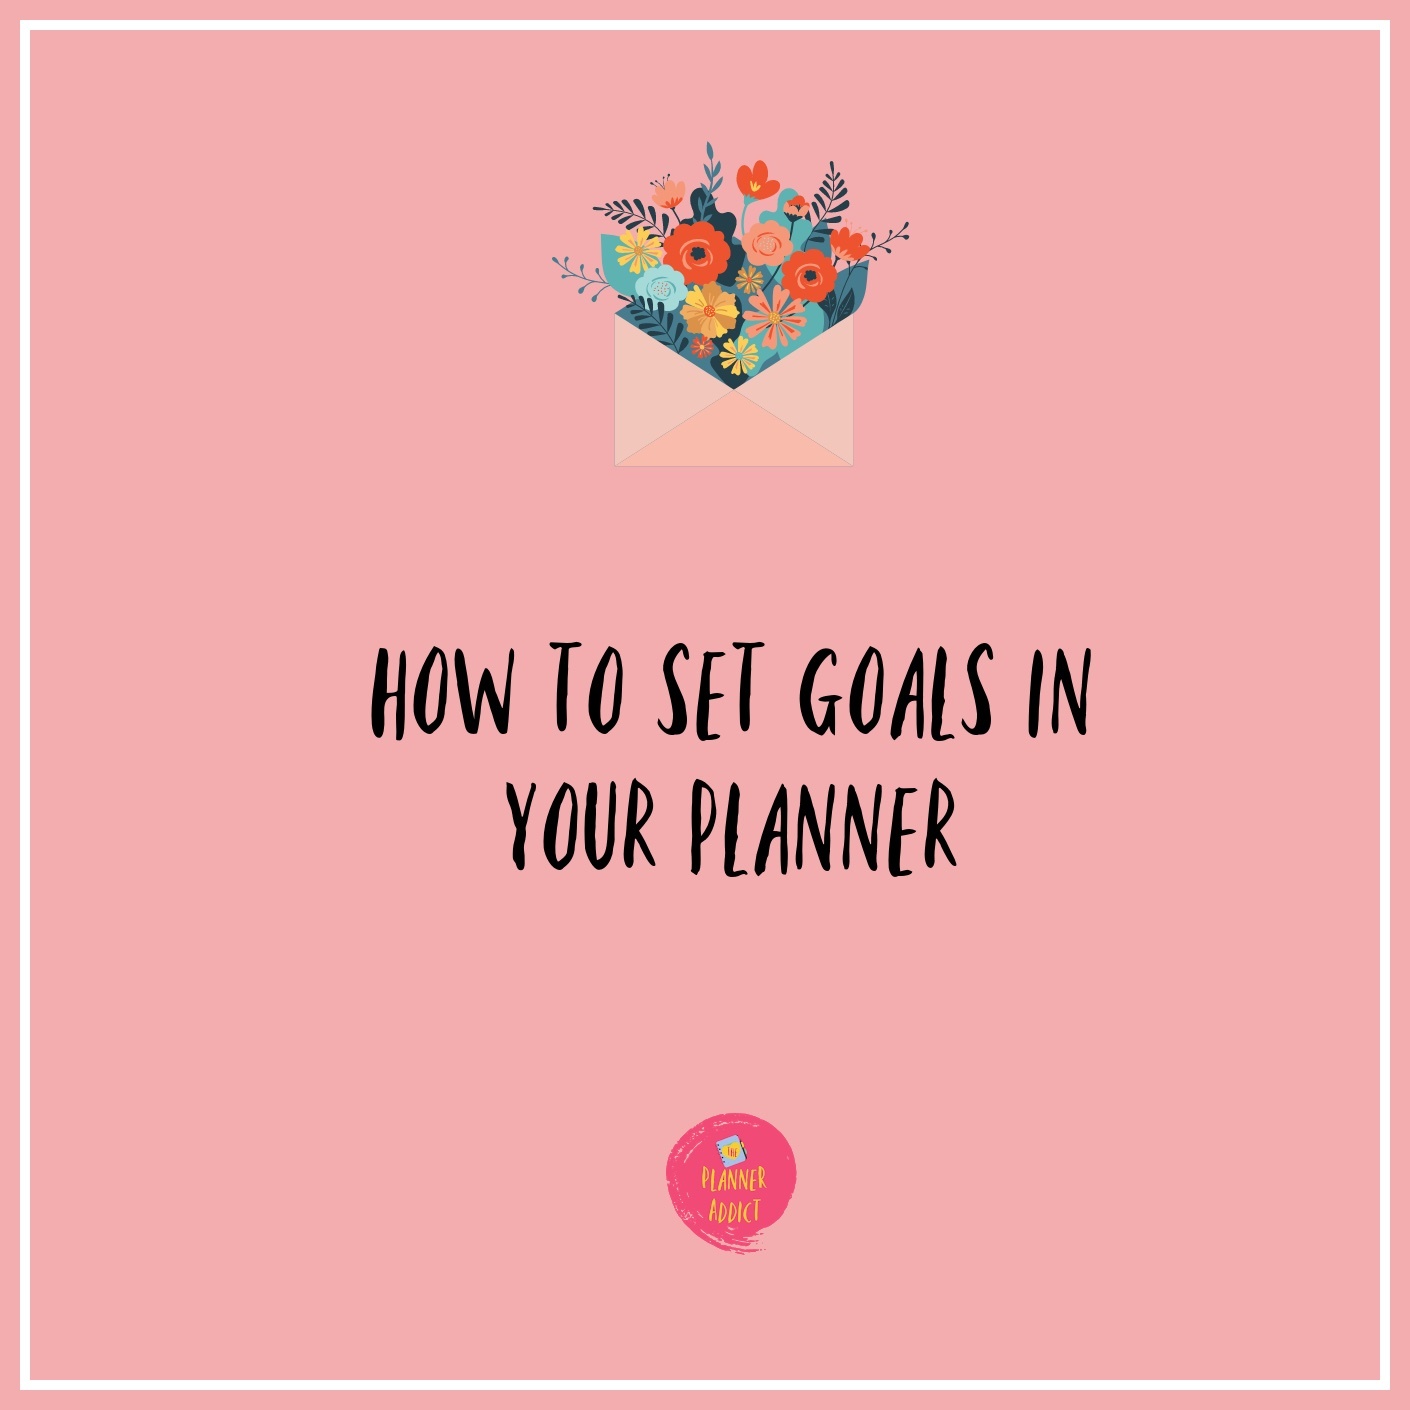 How to set goals in your planner.